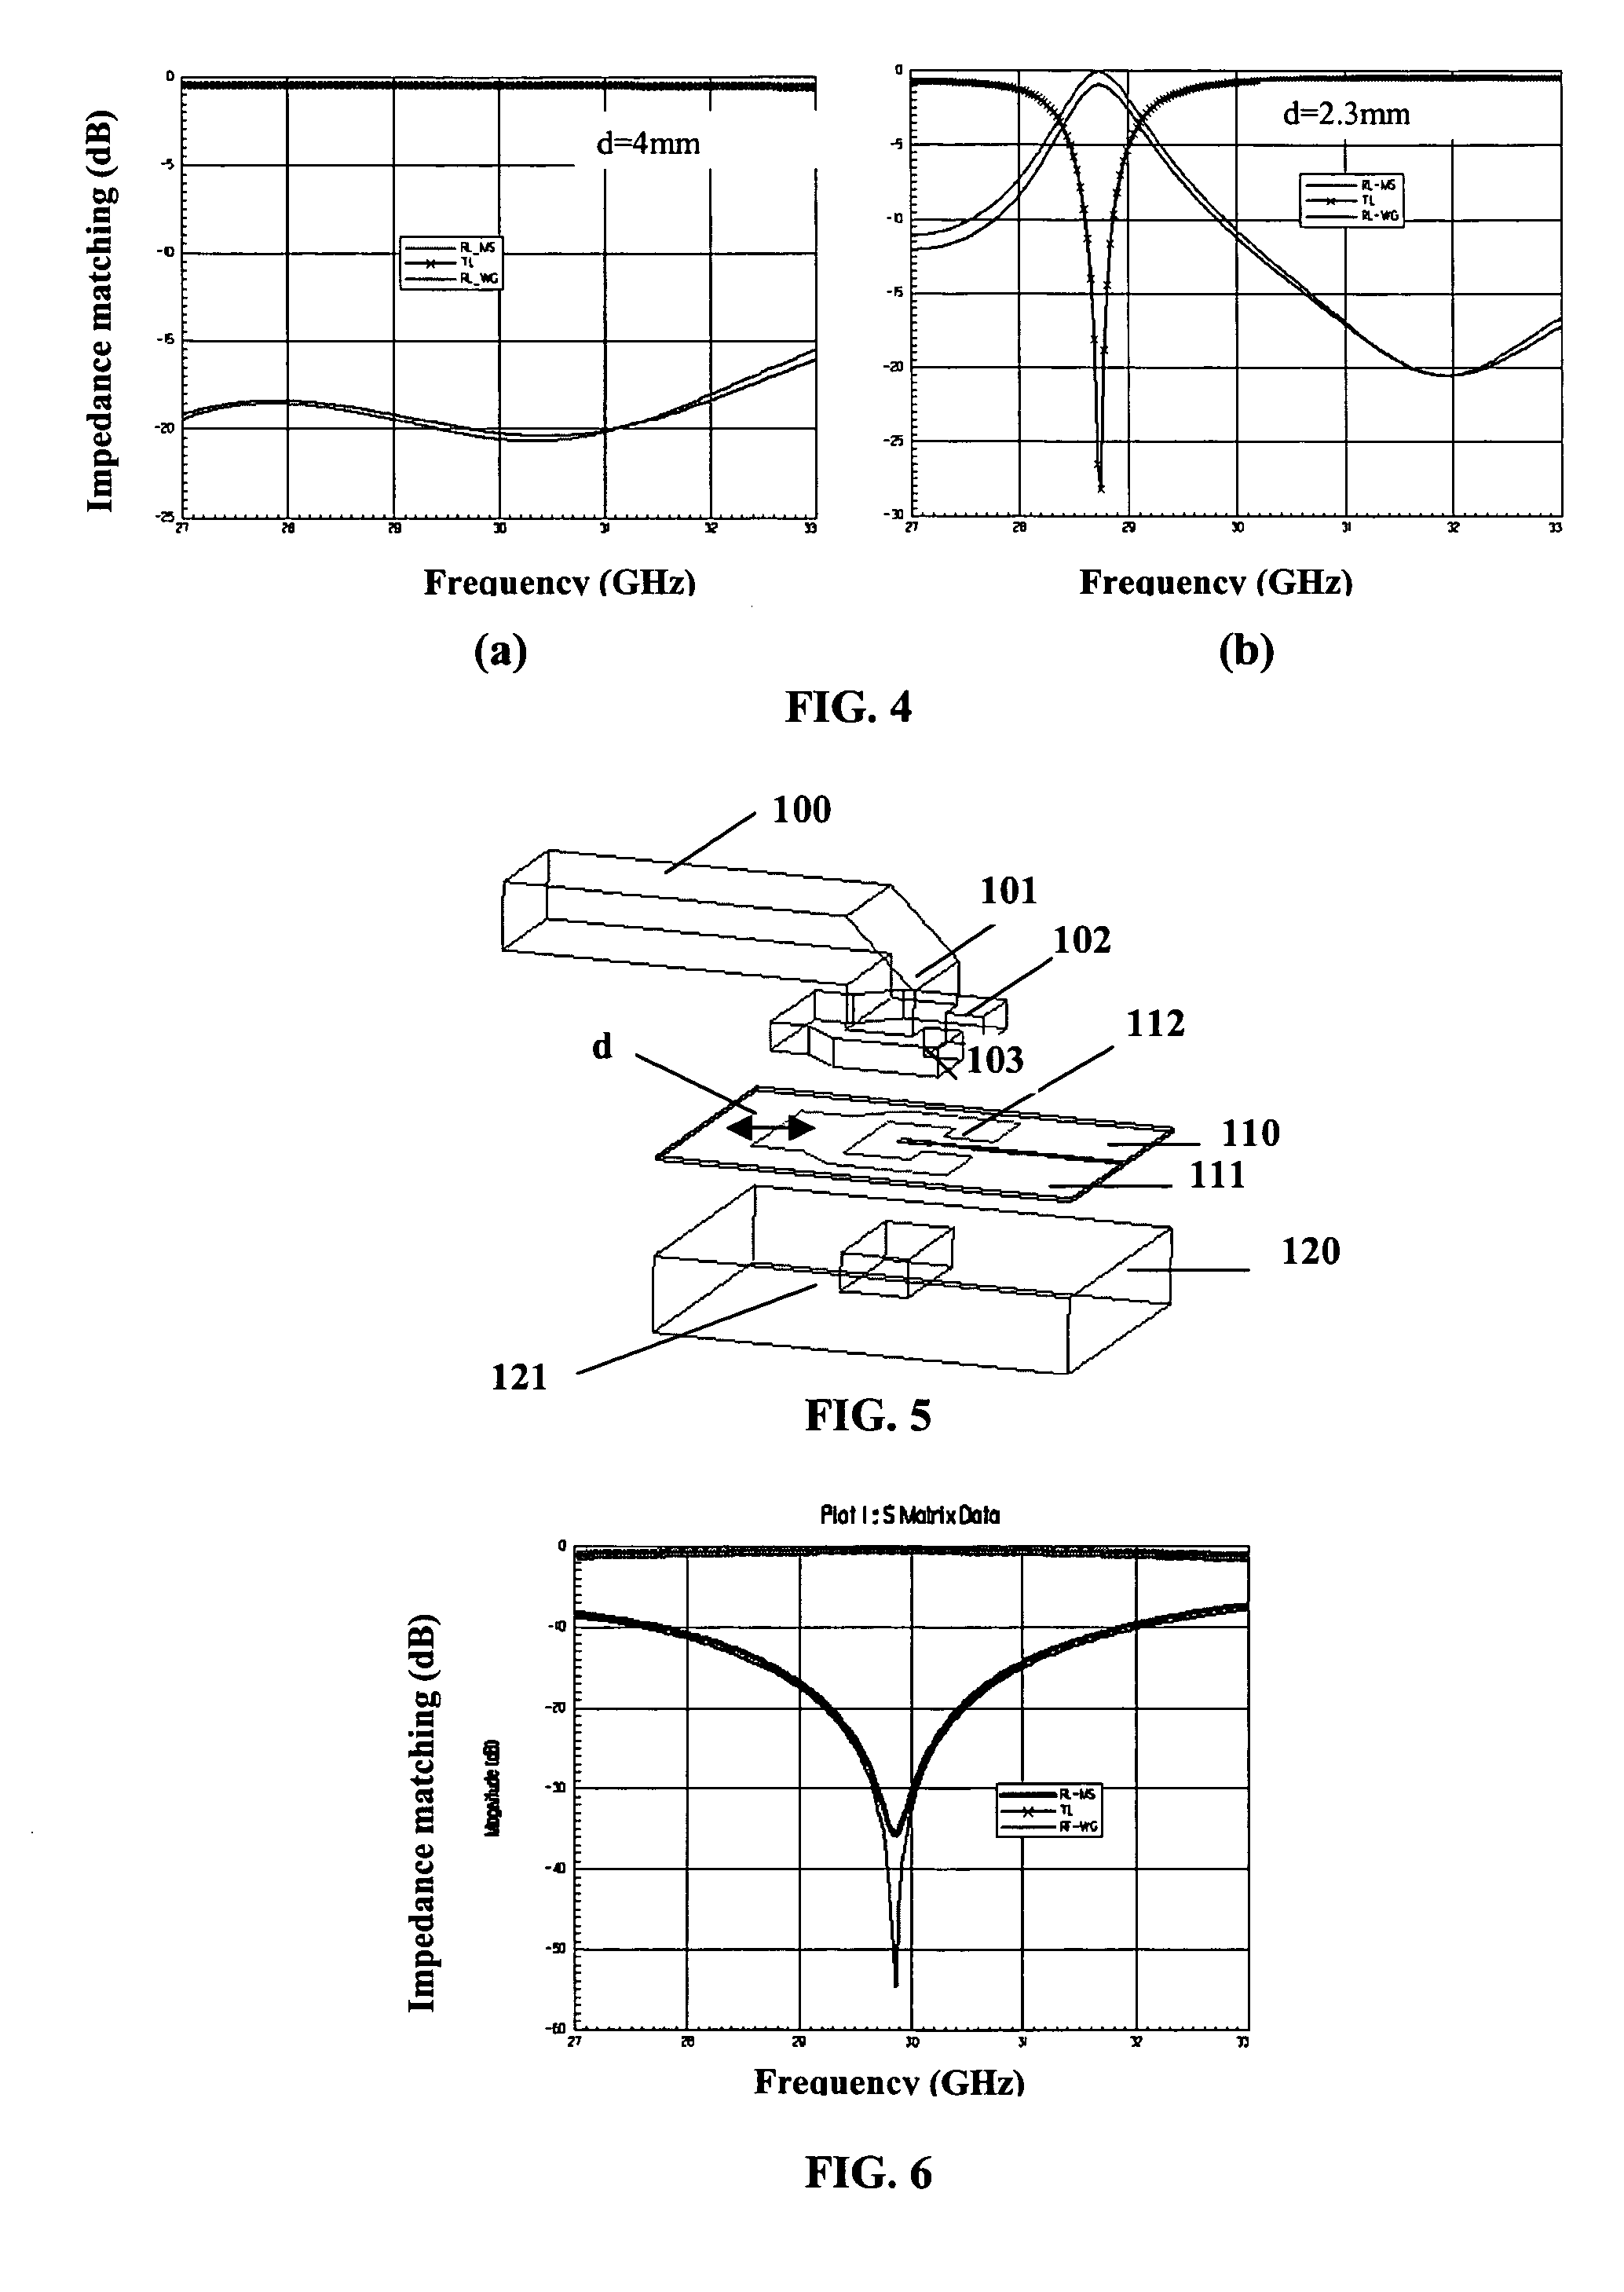 Contact-free element of transition between a waveguide and a microstrip line